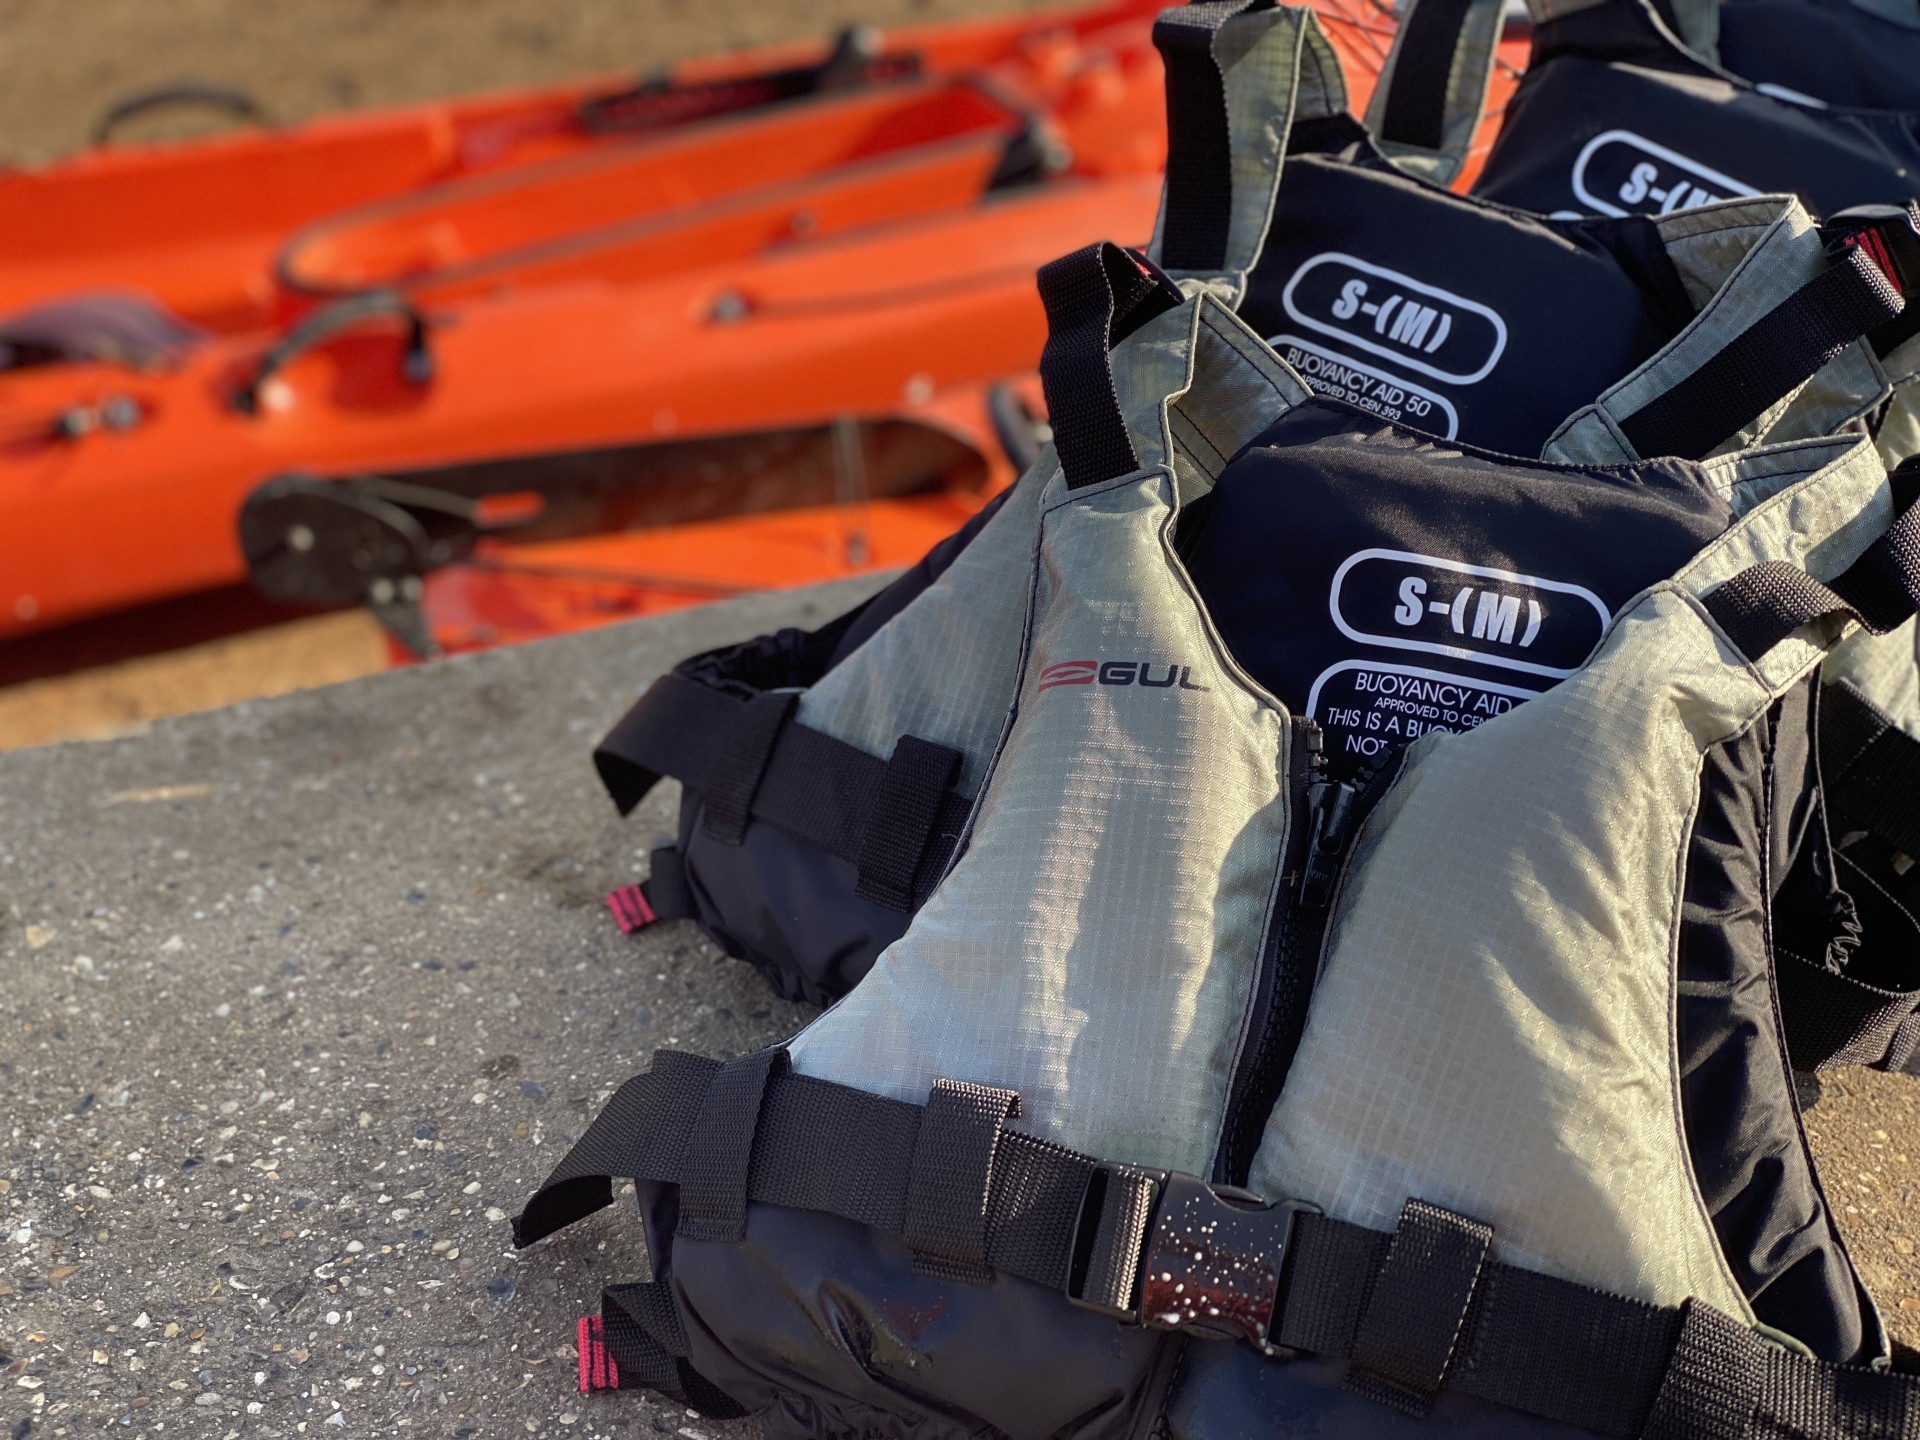 Buoyancy aids lined up ready to be issued to kayakers.